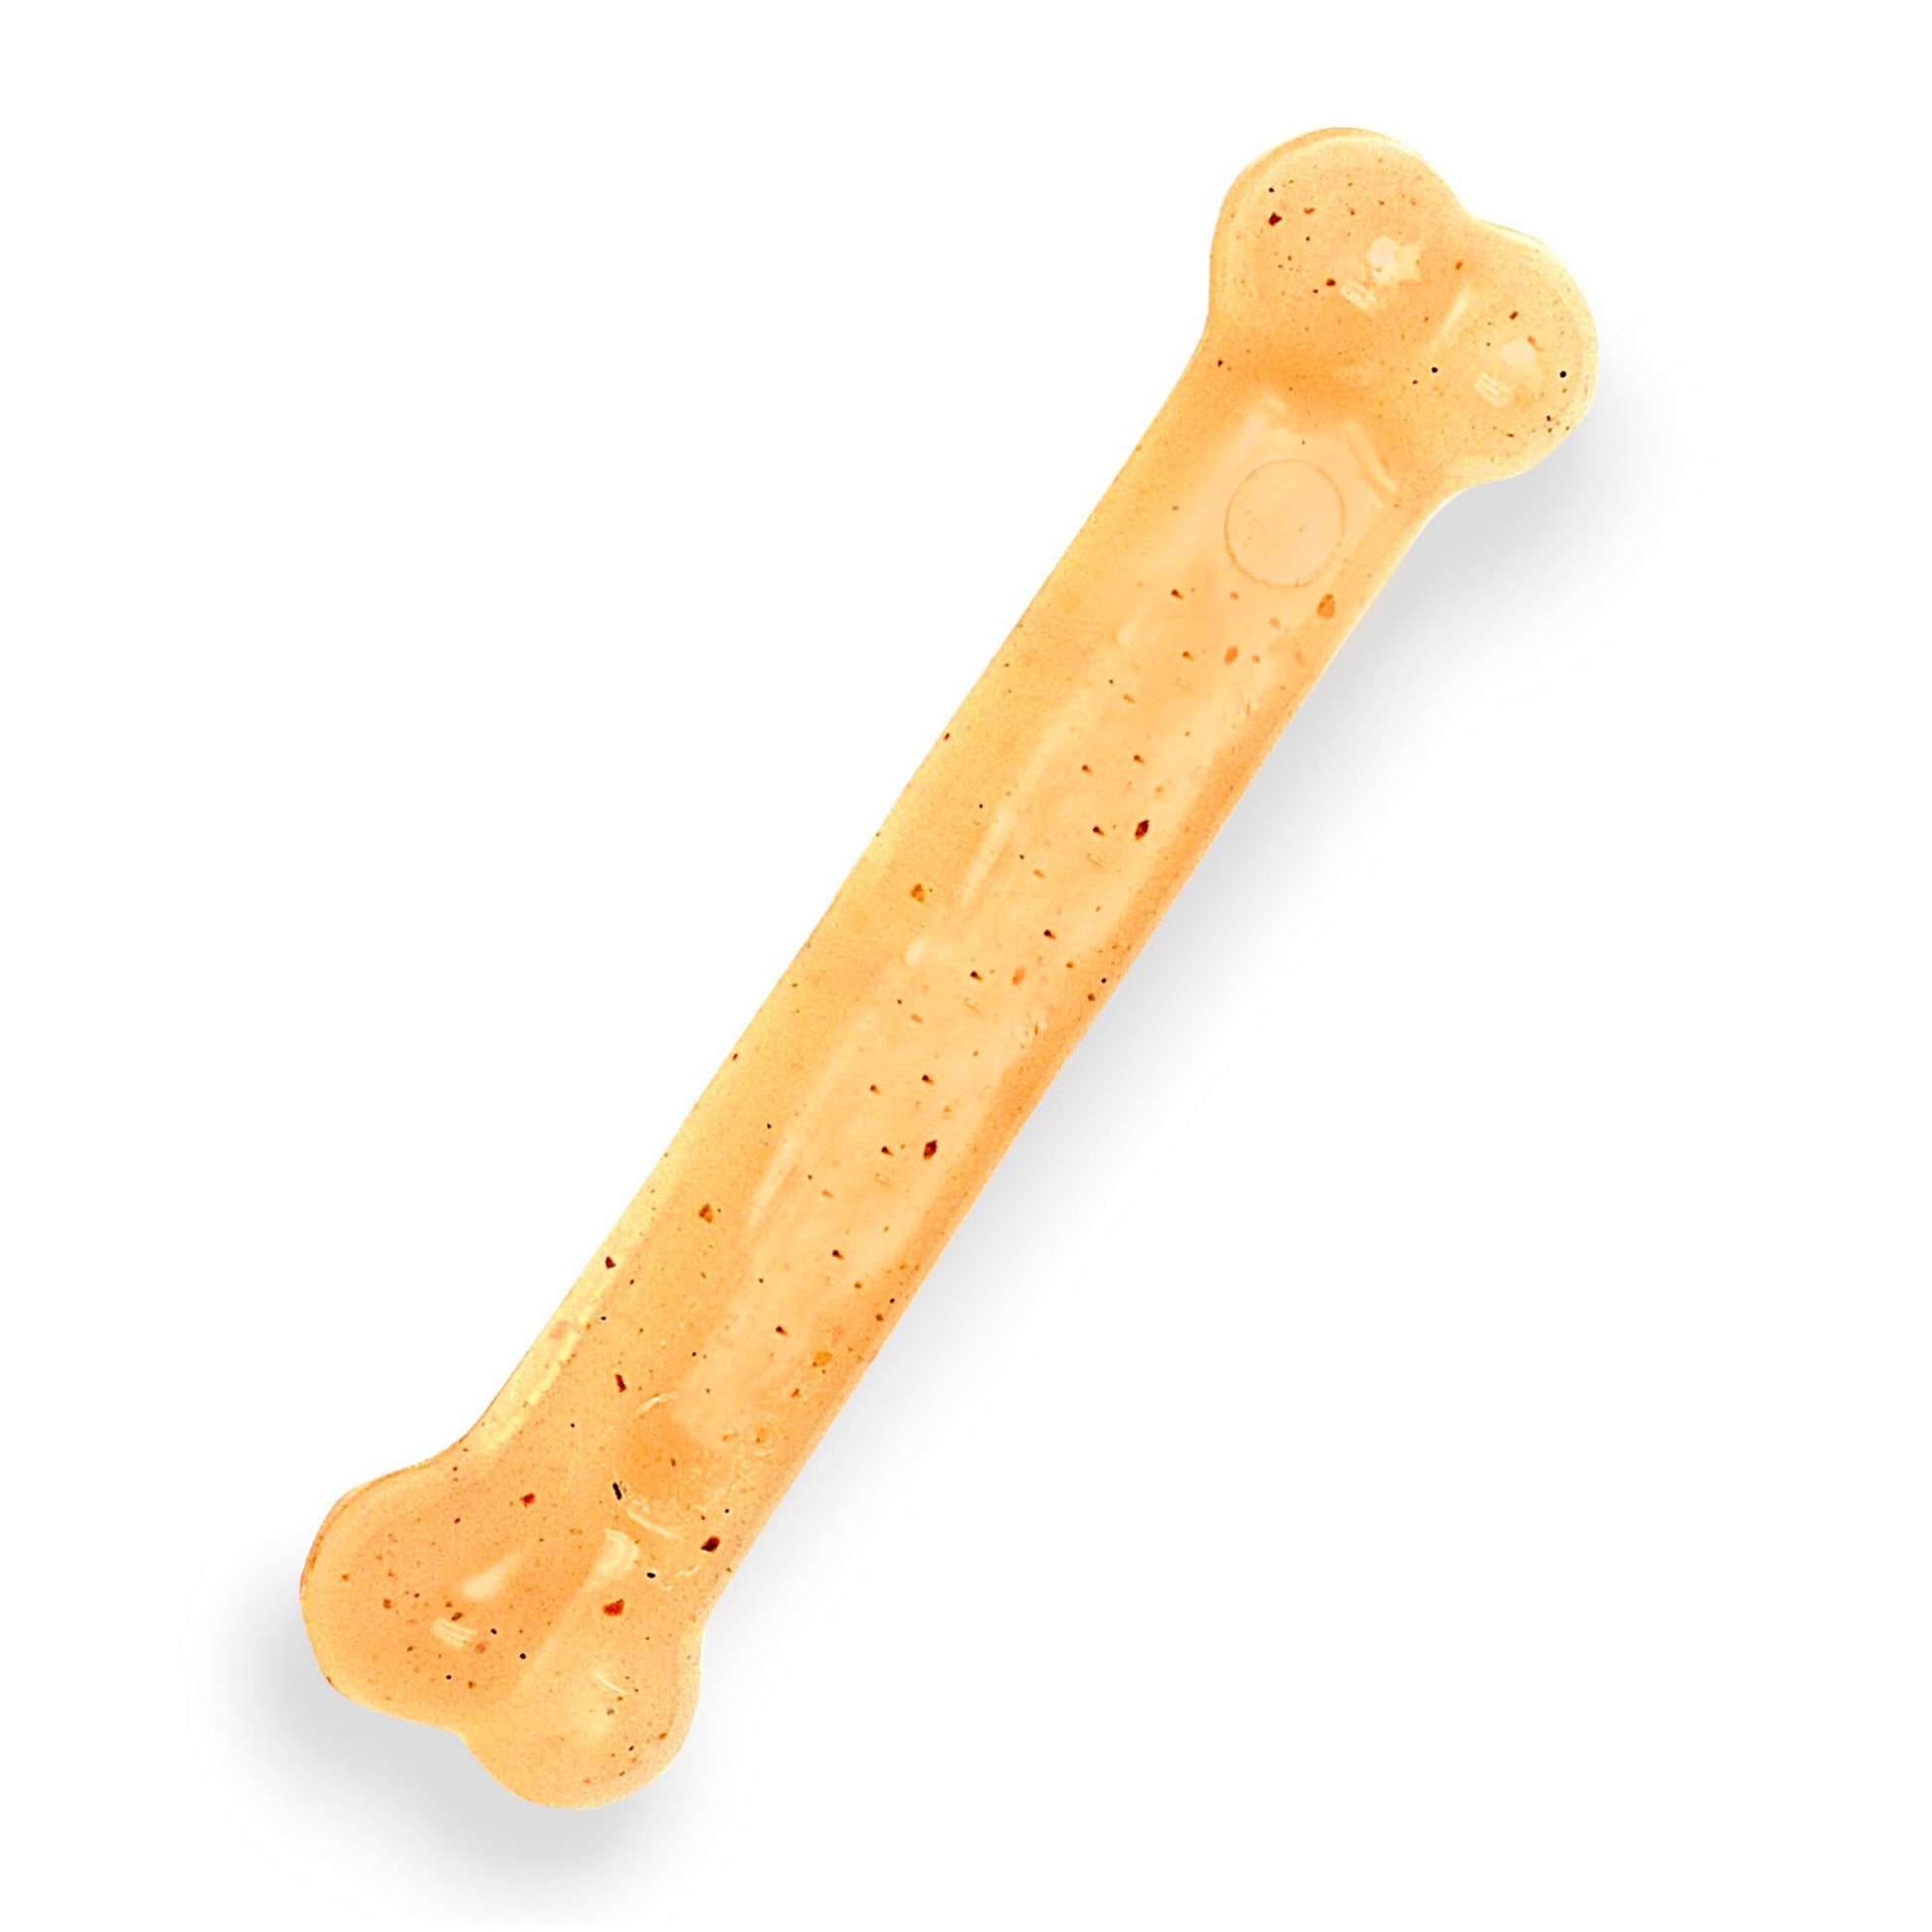 Nylabone Flex Moderate Chew Dog Toy Chicken Flavor Large/Giant - Up To 50 lb - 6